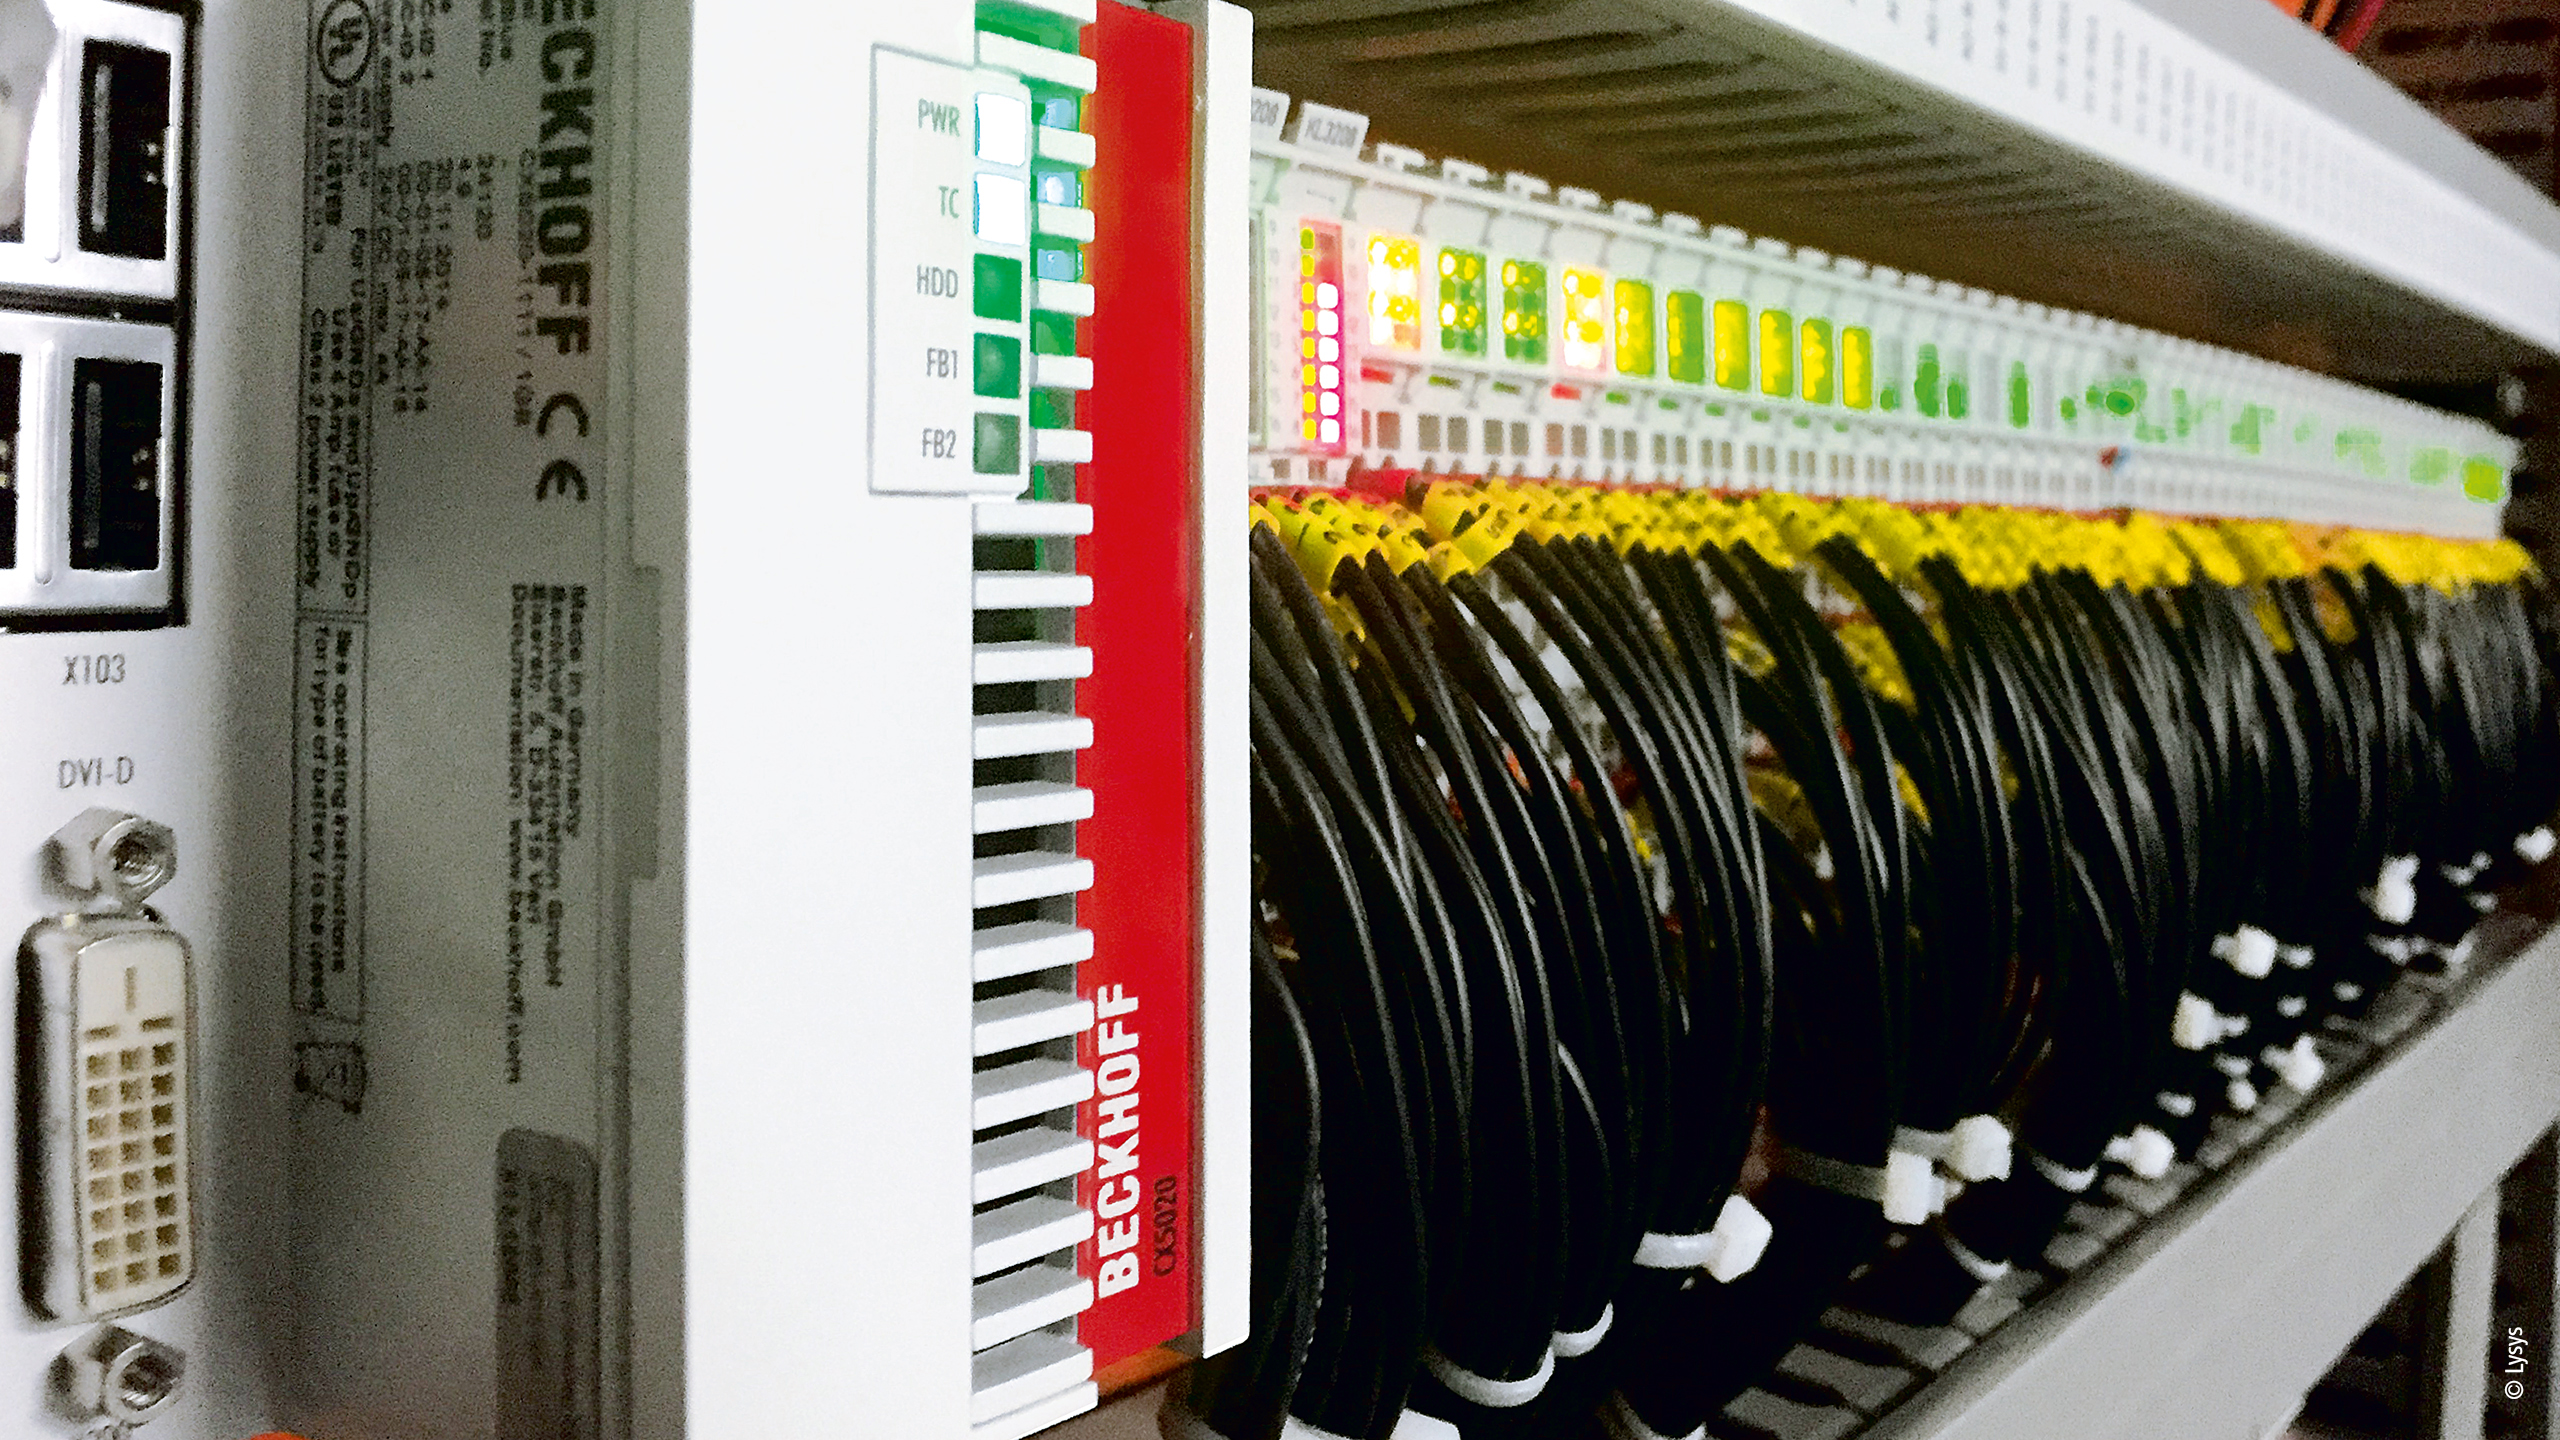 A total of 29 CX-series Embedded PCs (here: CX5020) enable precisely controlled building operation. 